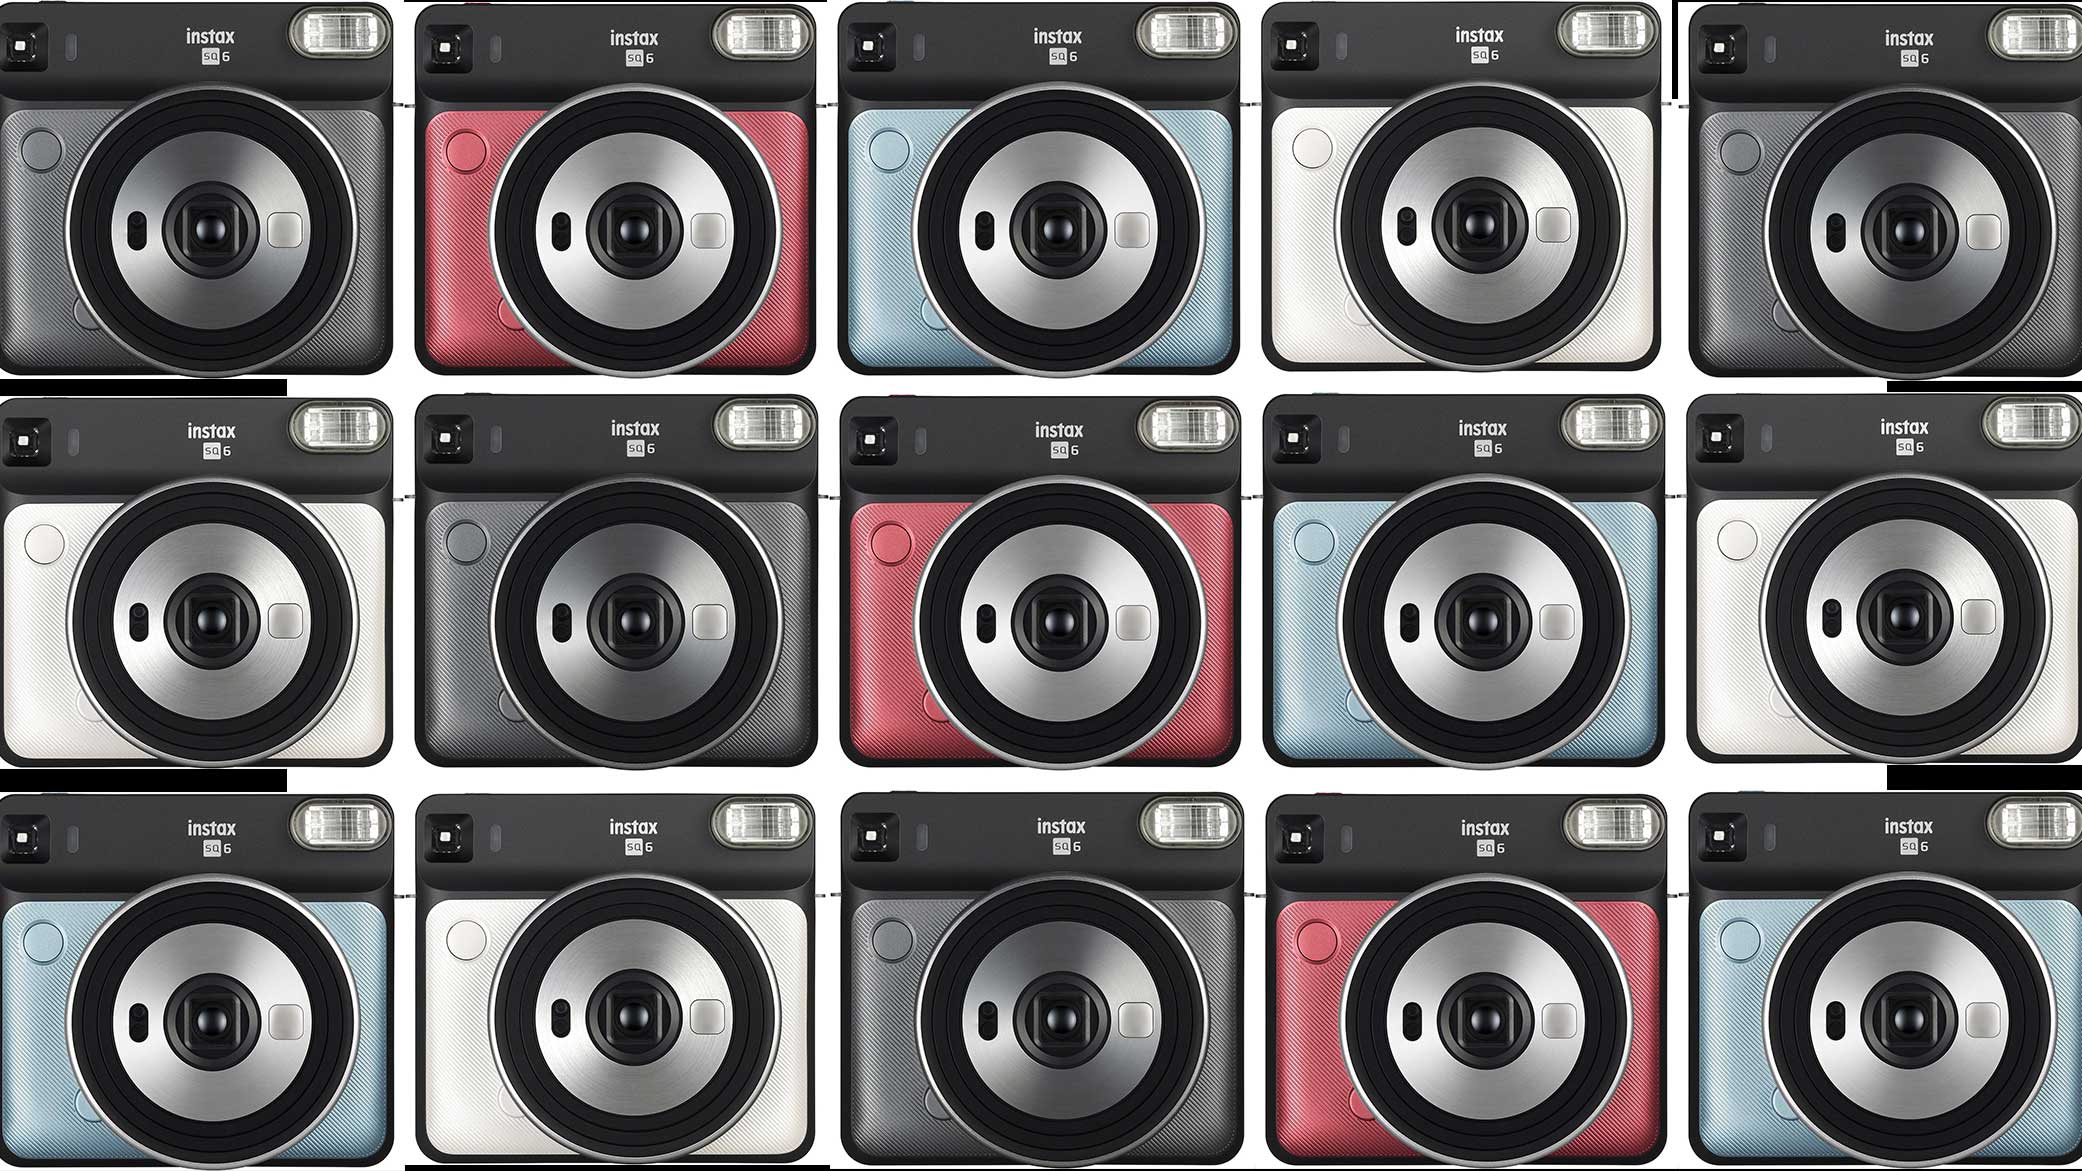 Save up to 31% on Fujifilm Instax instant film cameras during Amazon’s Black Friday sale